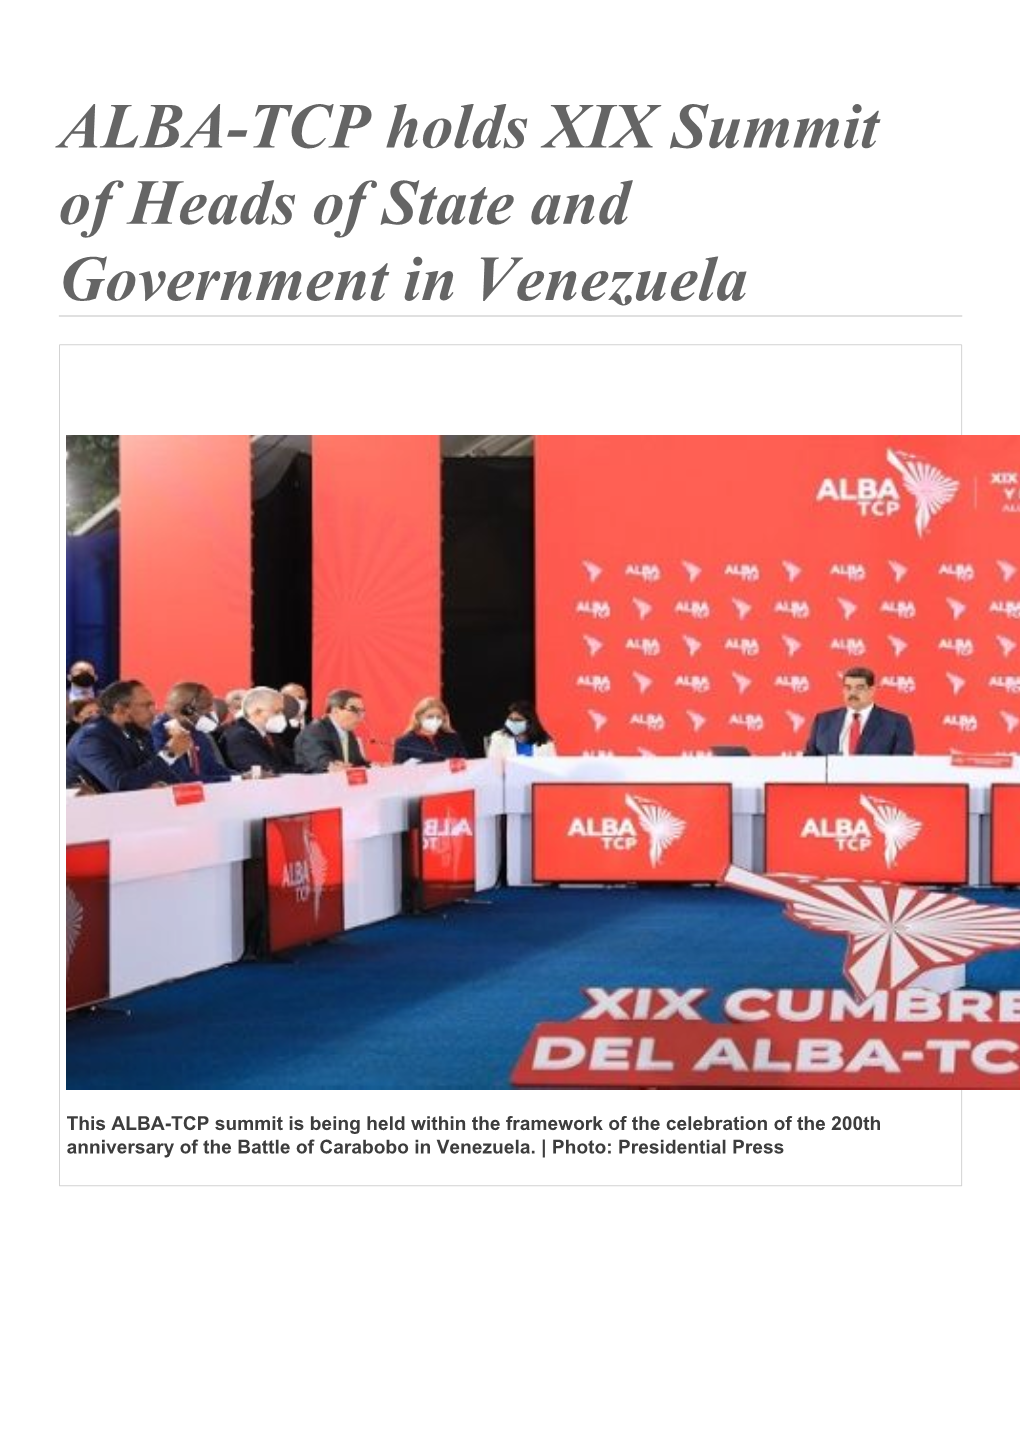 ALBA-TCP Holds XIX Summit of Heads of State and Government in Venezuela